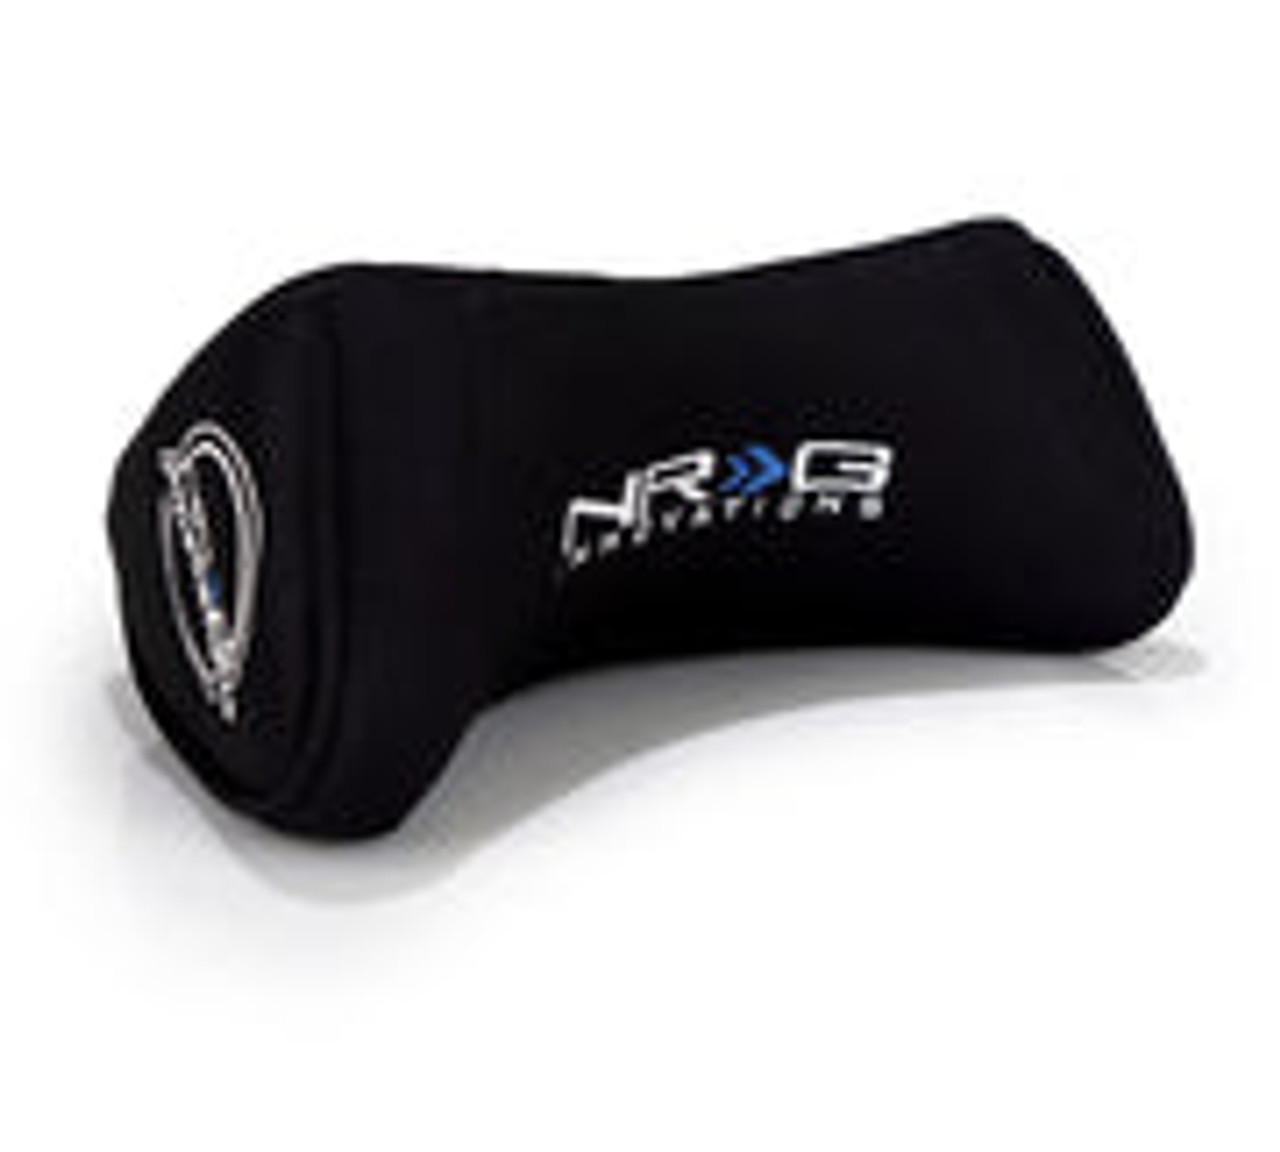 NRG Memory Foam Neck Pillow For Any Seats